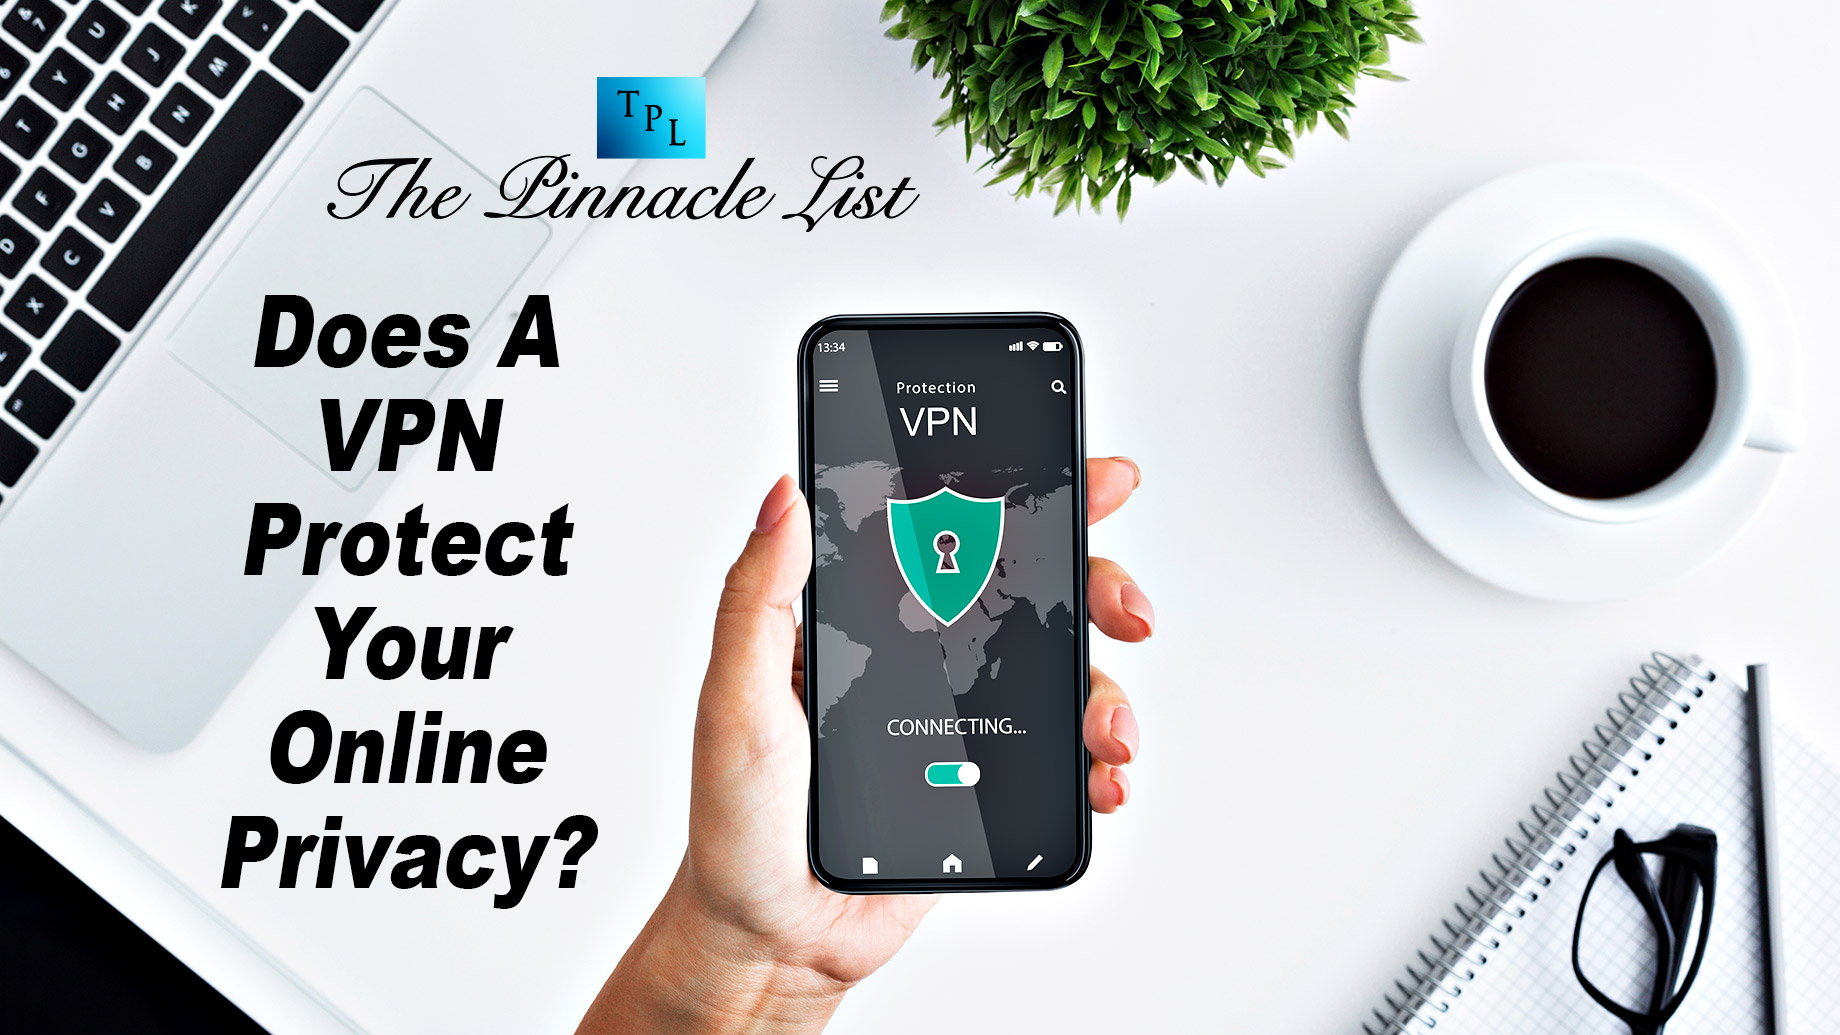 Does A VPN Protect Your Online Privacy?